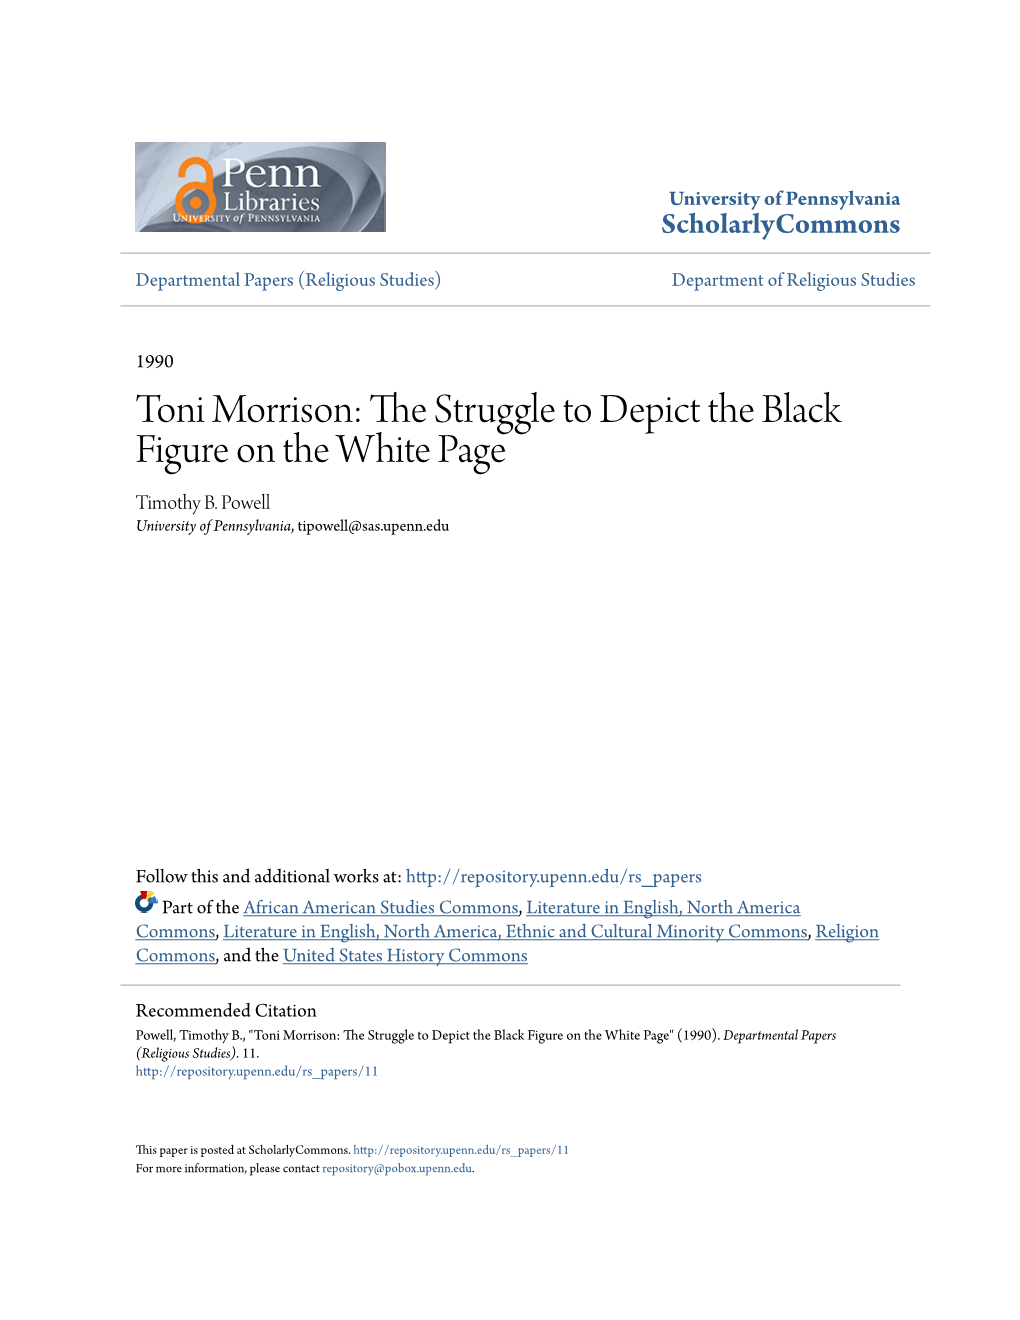 Toni Morrison: the Struggle to Depict the Black Figure on the White Page